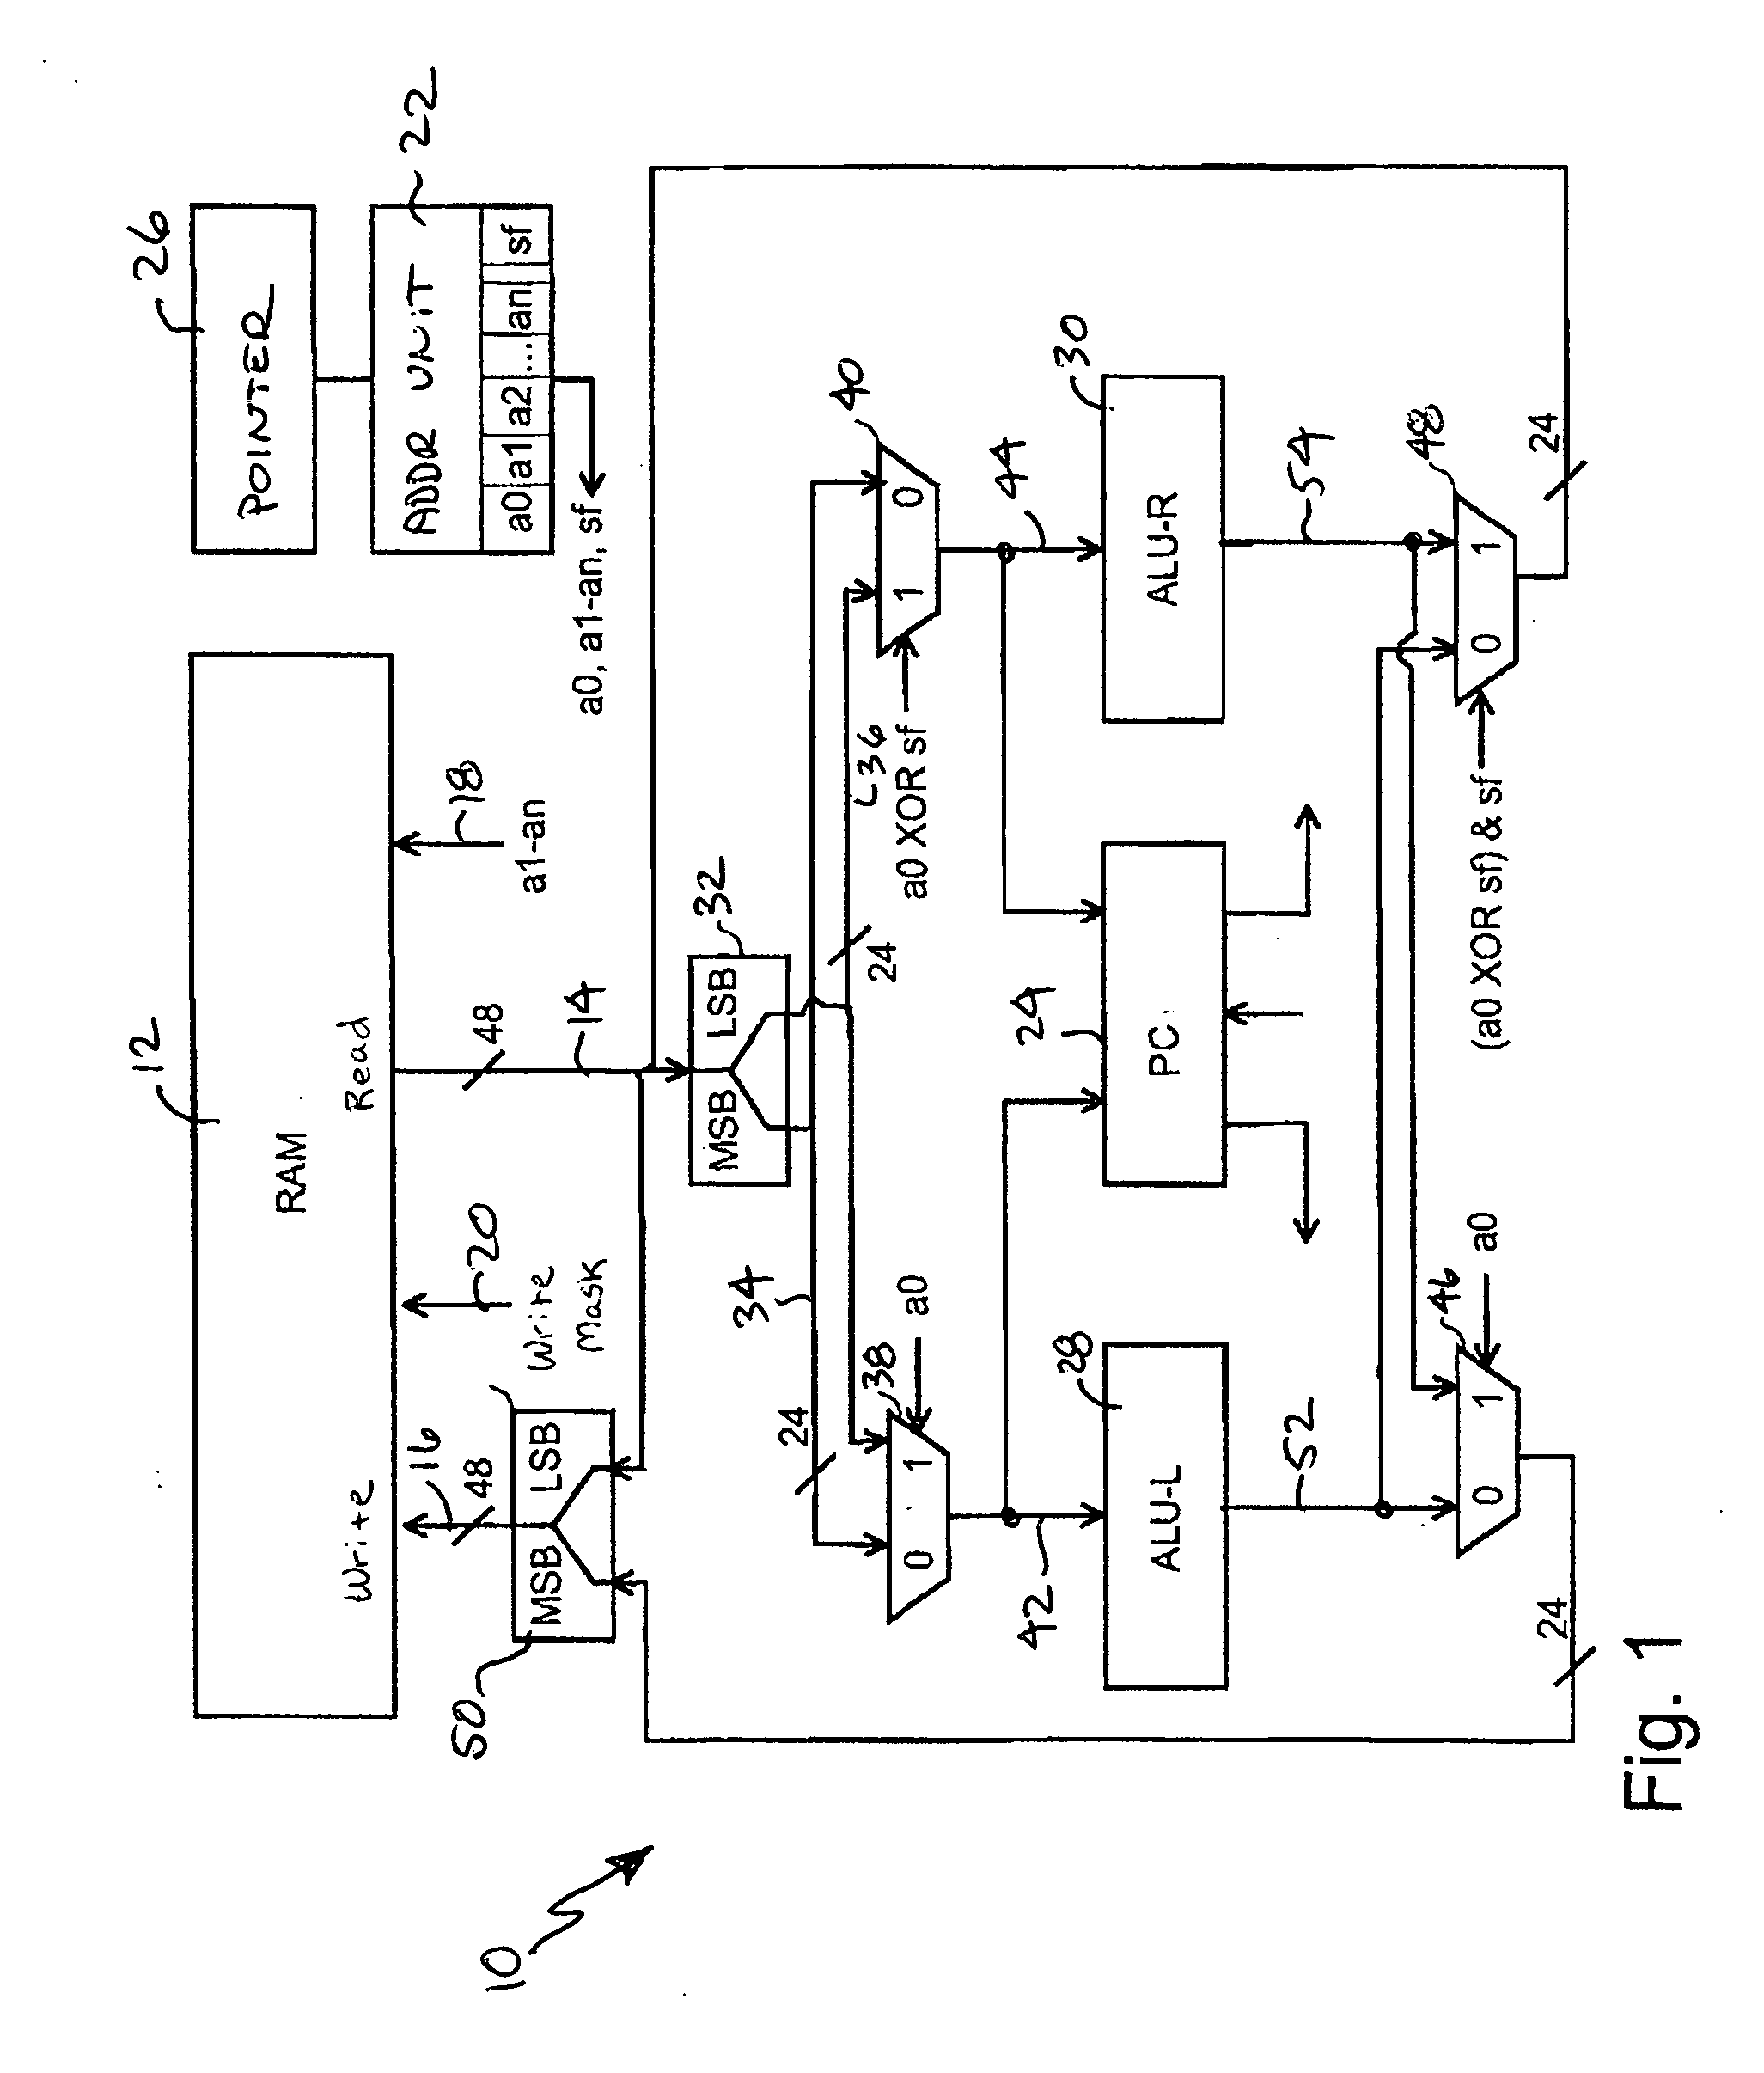 Processor for processing data of different data types